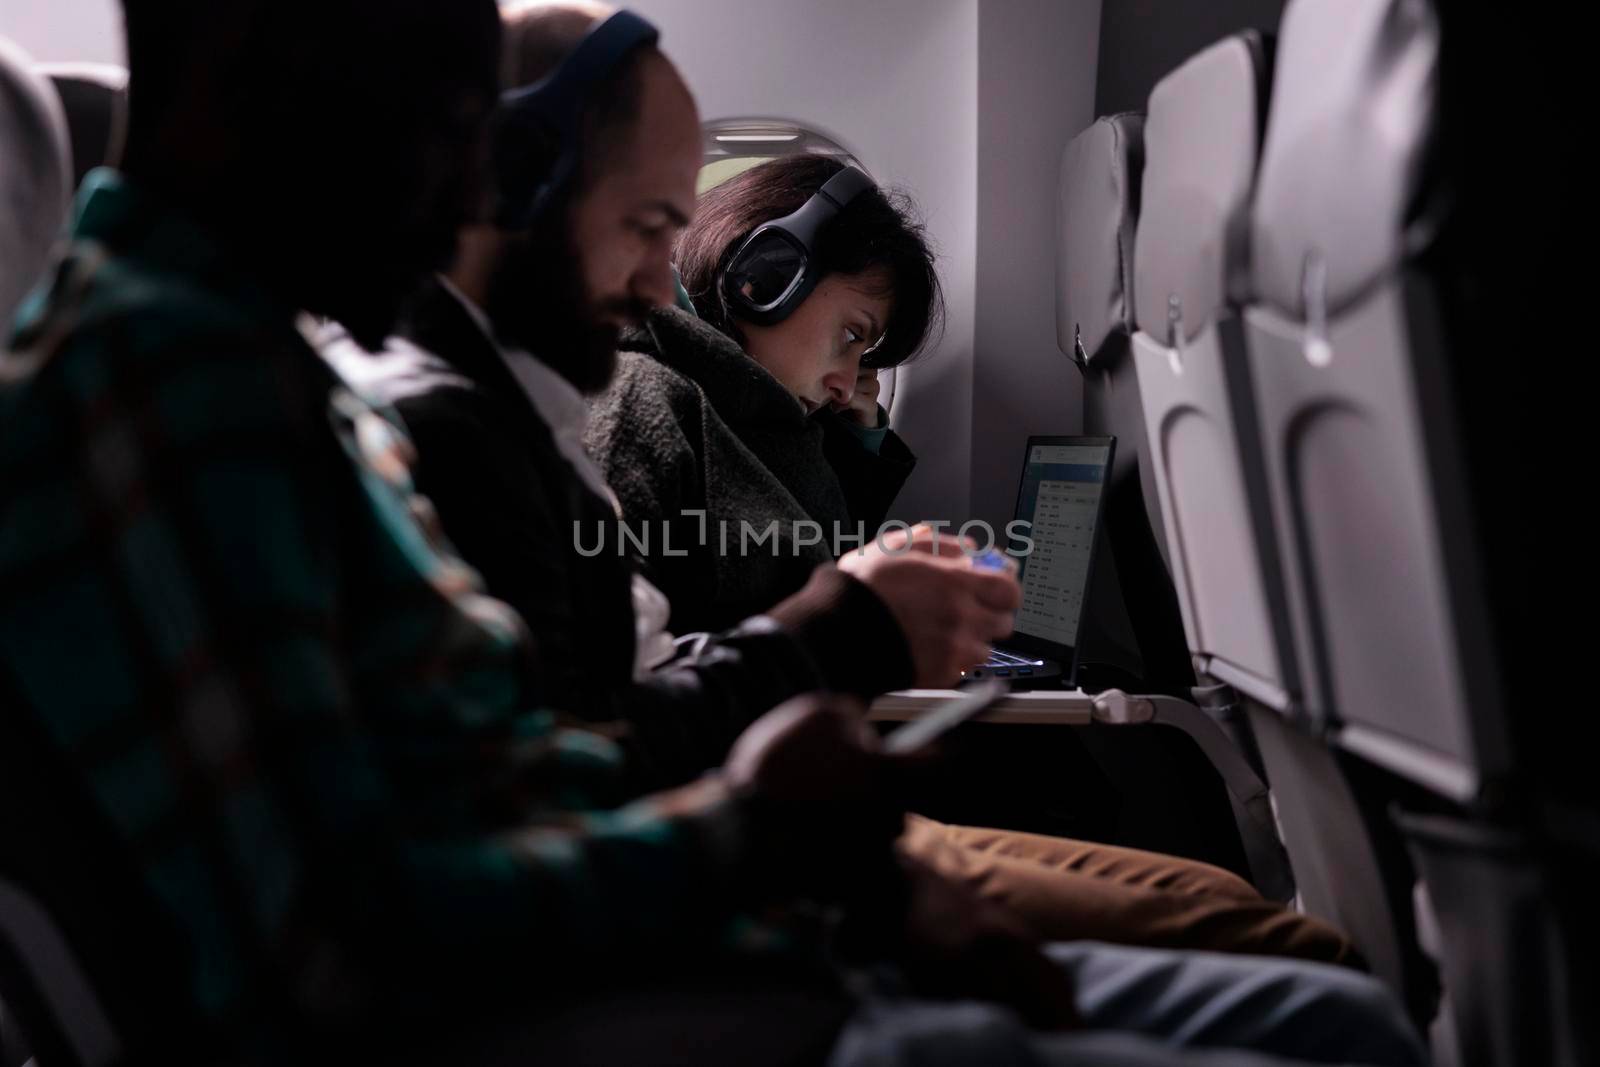 Multiethnic group of passengers flying abroad by airplane jet, using modern devices during international plane transportation. Travelling in economy class with airways flight trip.